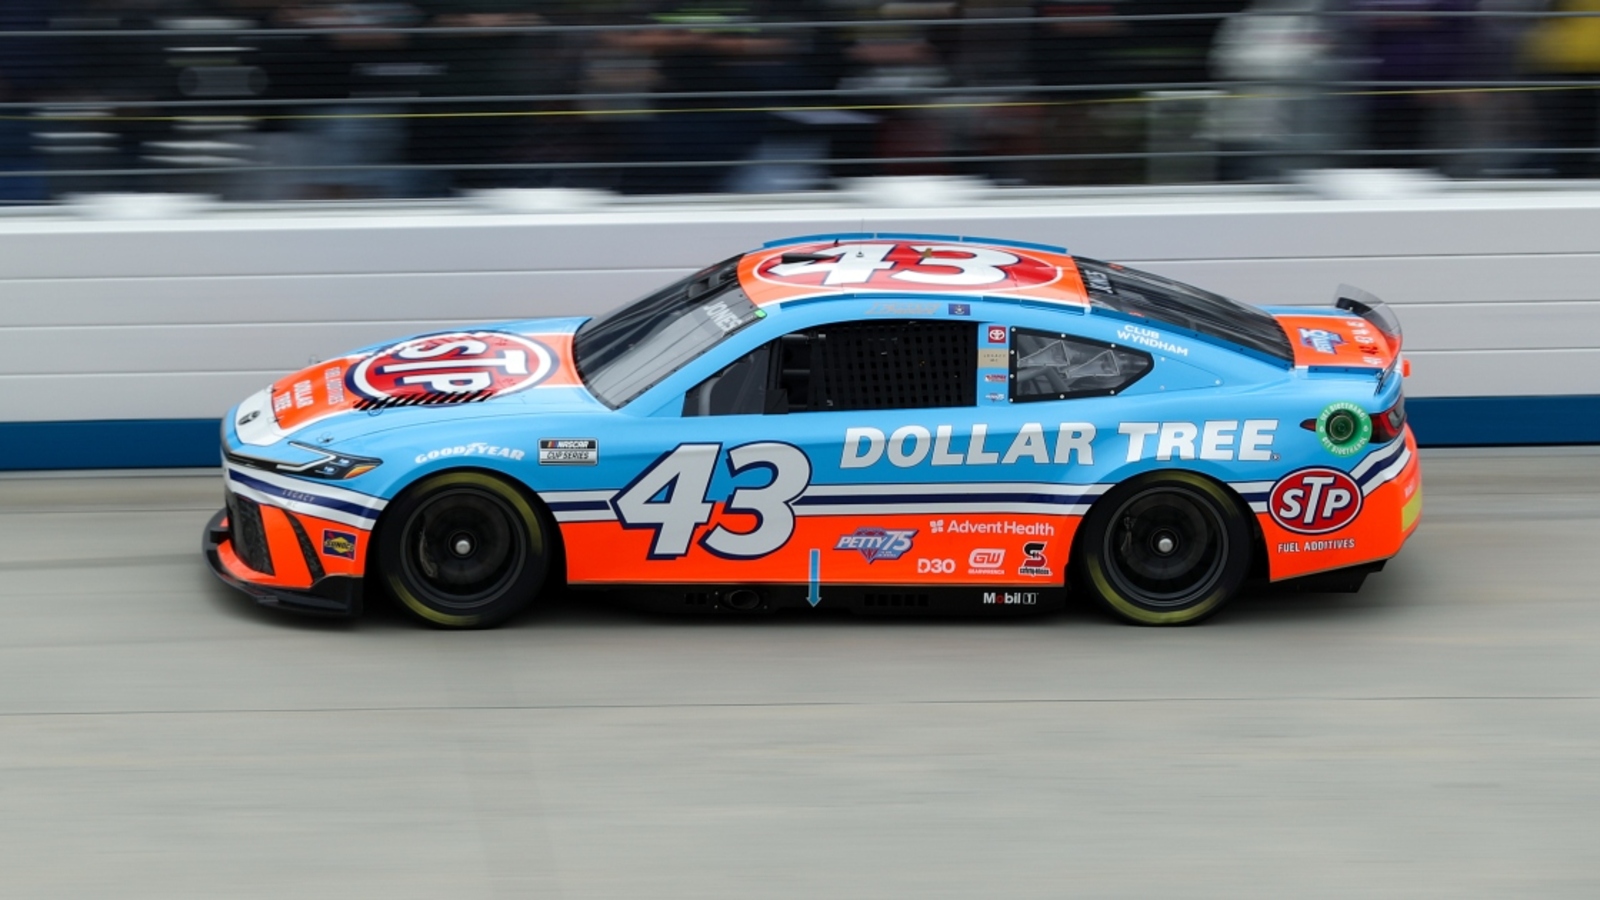 Corey Heim will have backup crew chief for No. 43 car due to ‘personal matter’ for Dave Elenz